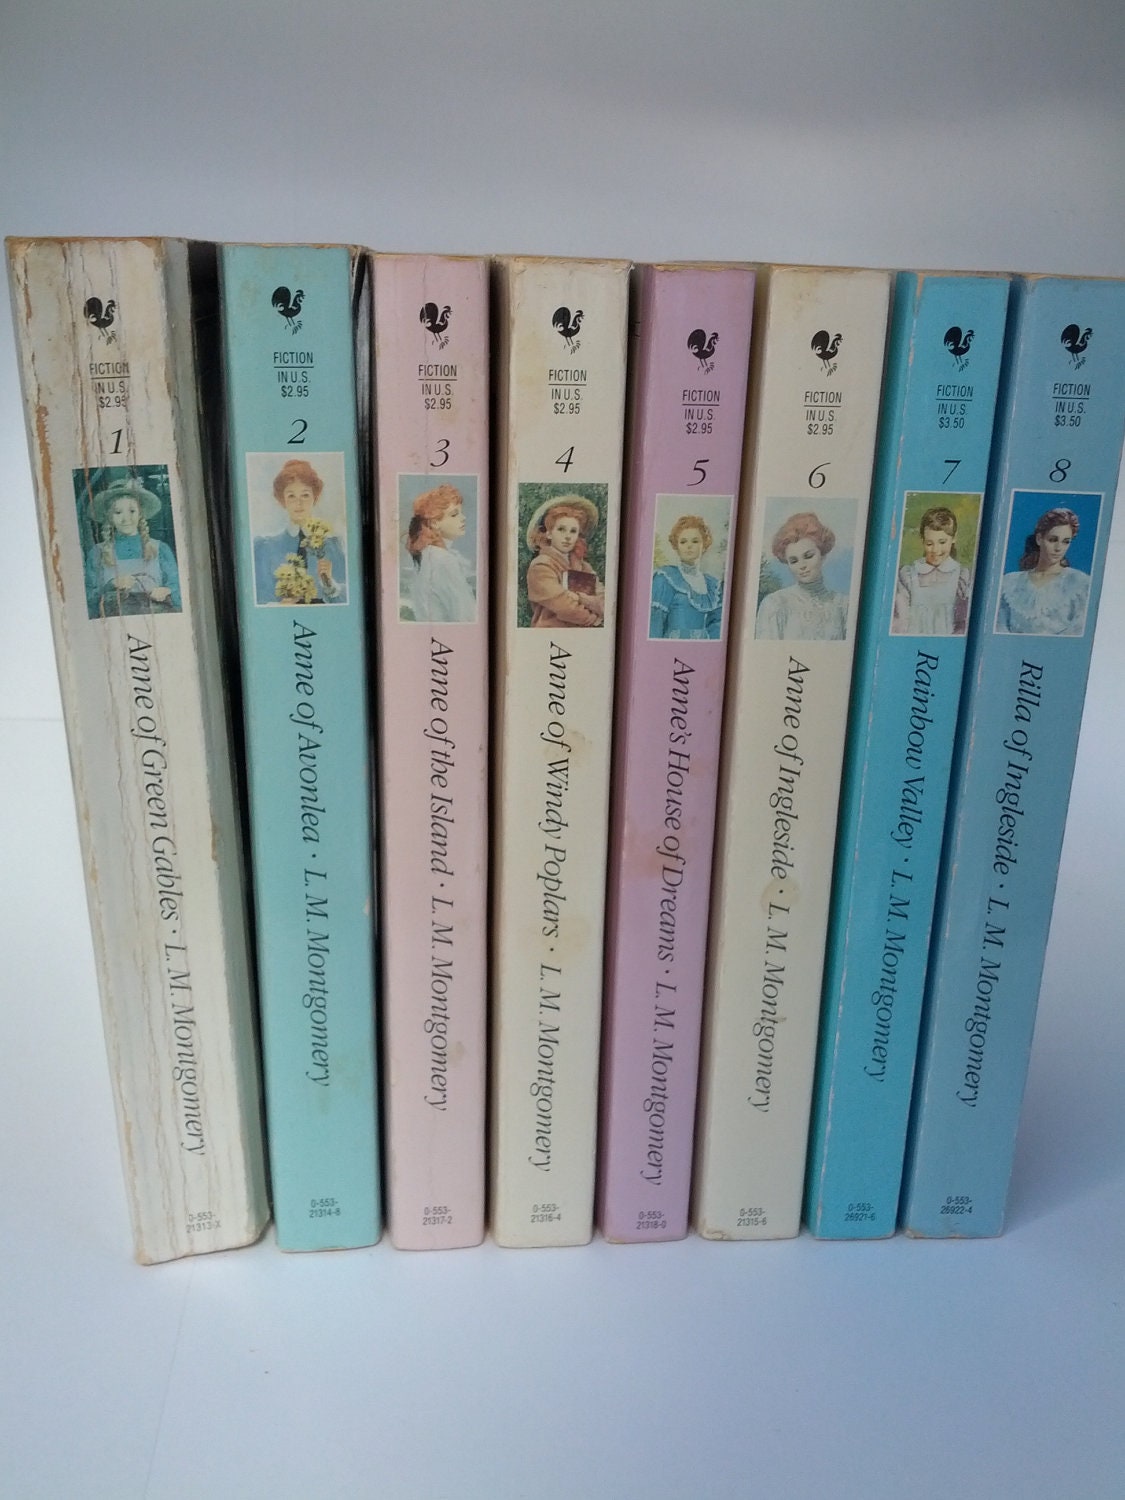 Vintage series of Anne of Green Gables, 1-8